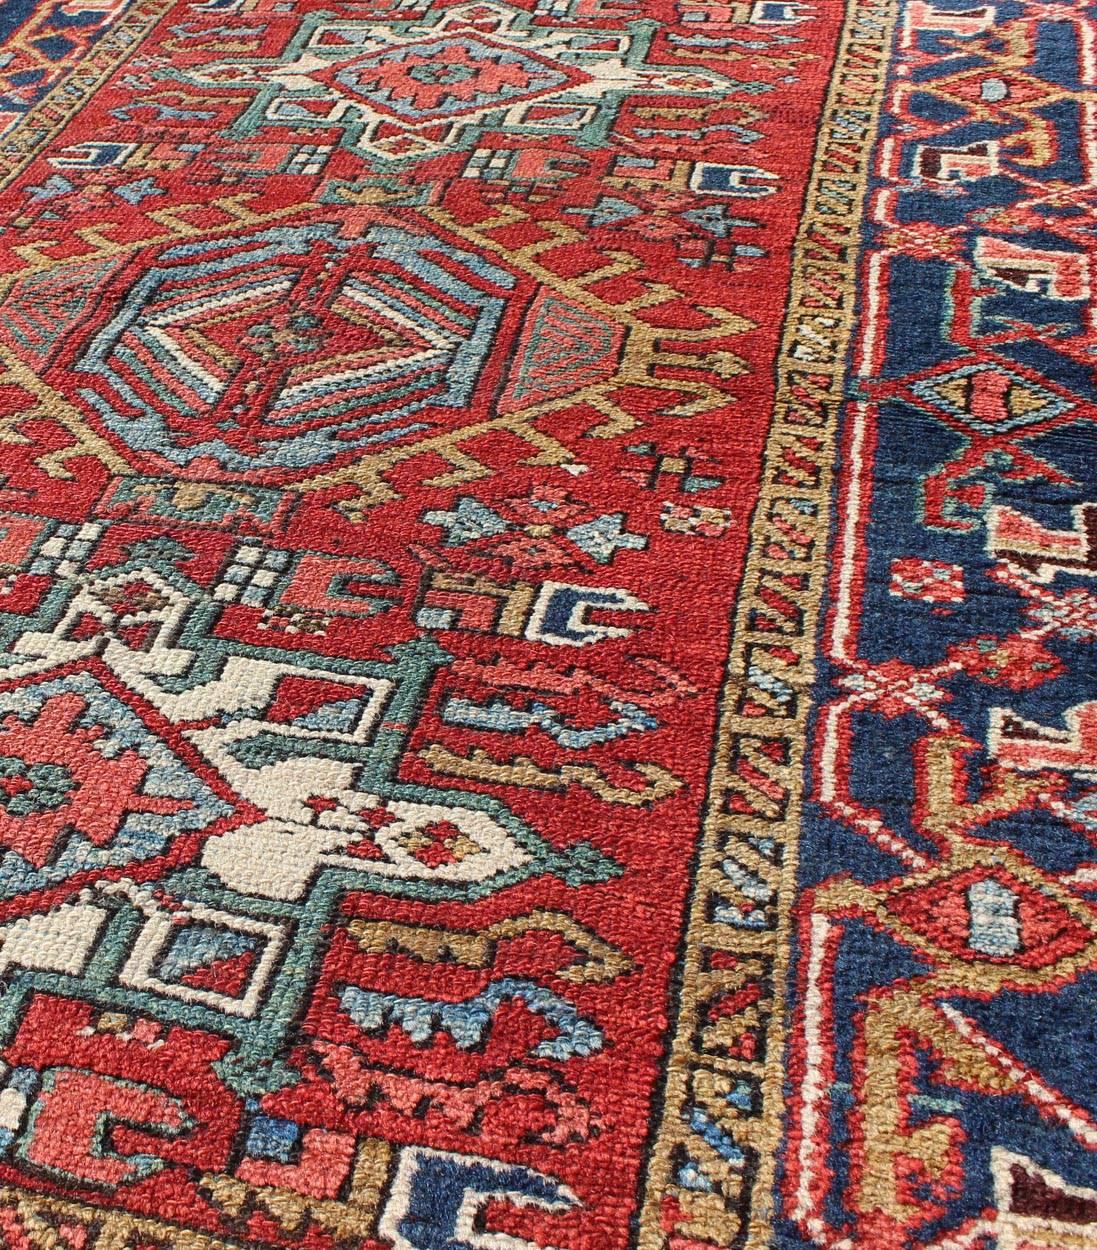 Wool Colorful Early 20th Century Antique Persian Karadjeh Rug with Tribal Medallions